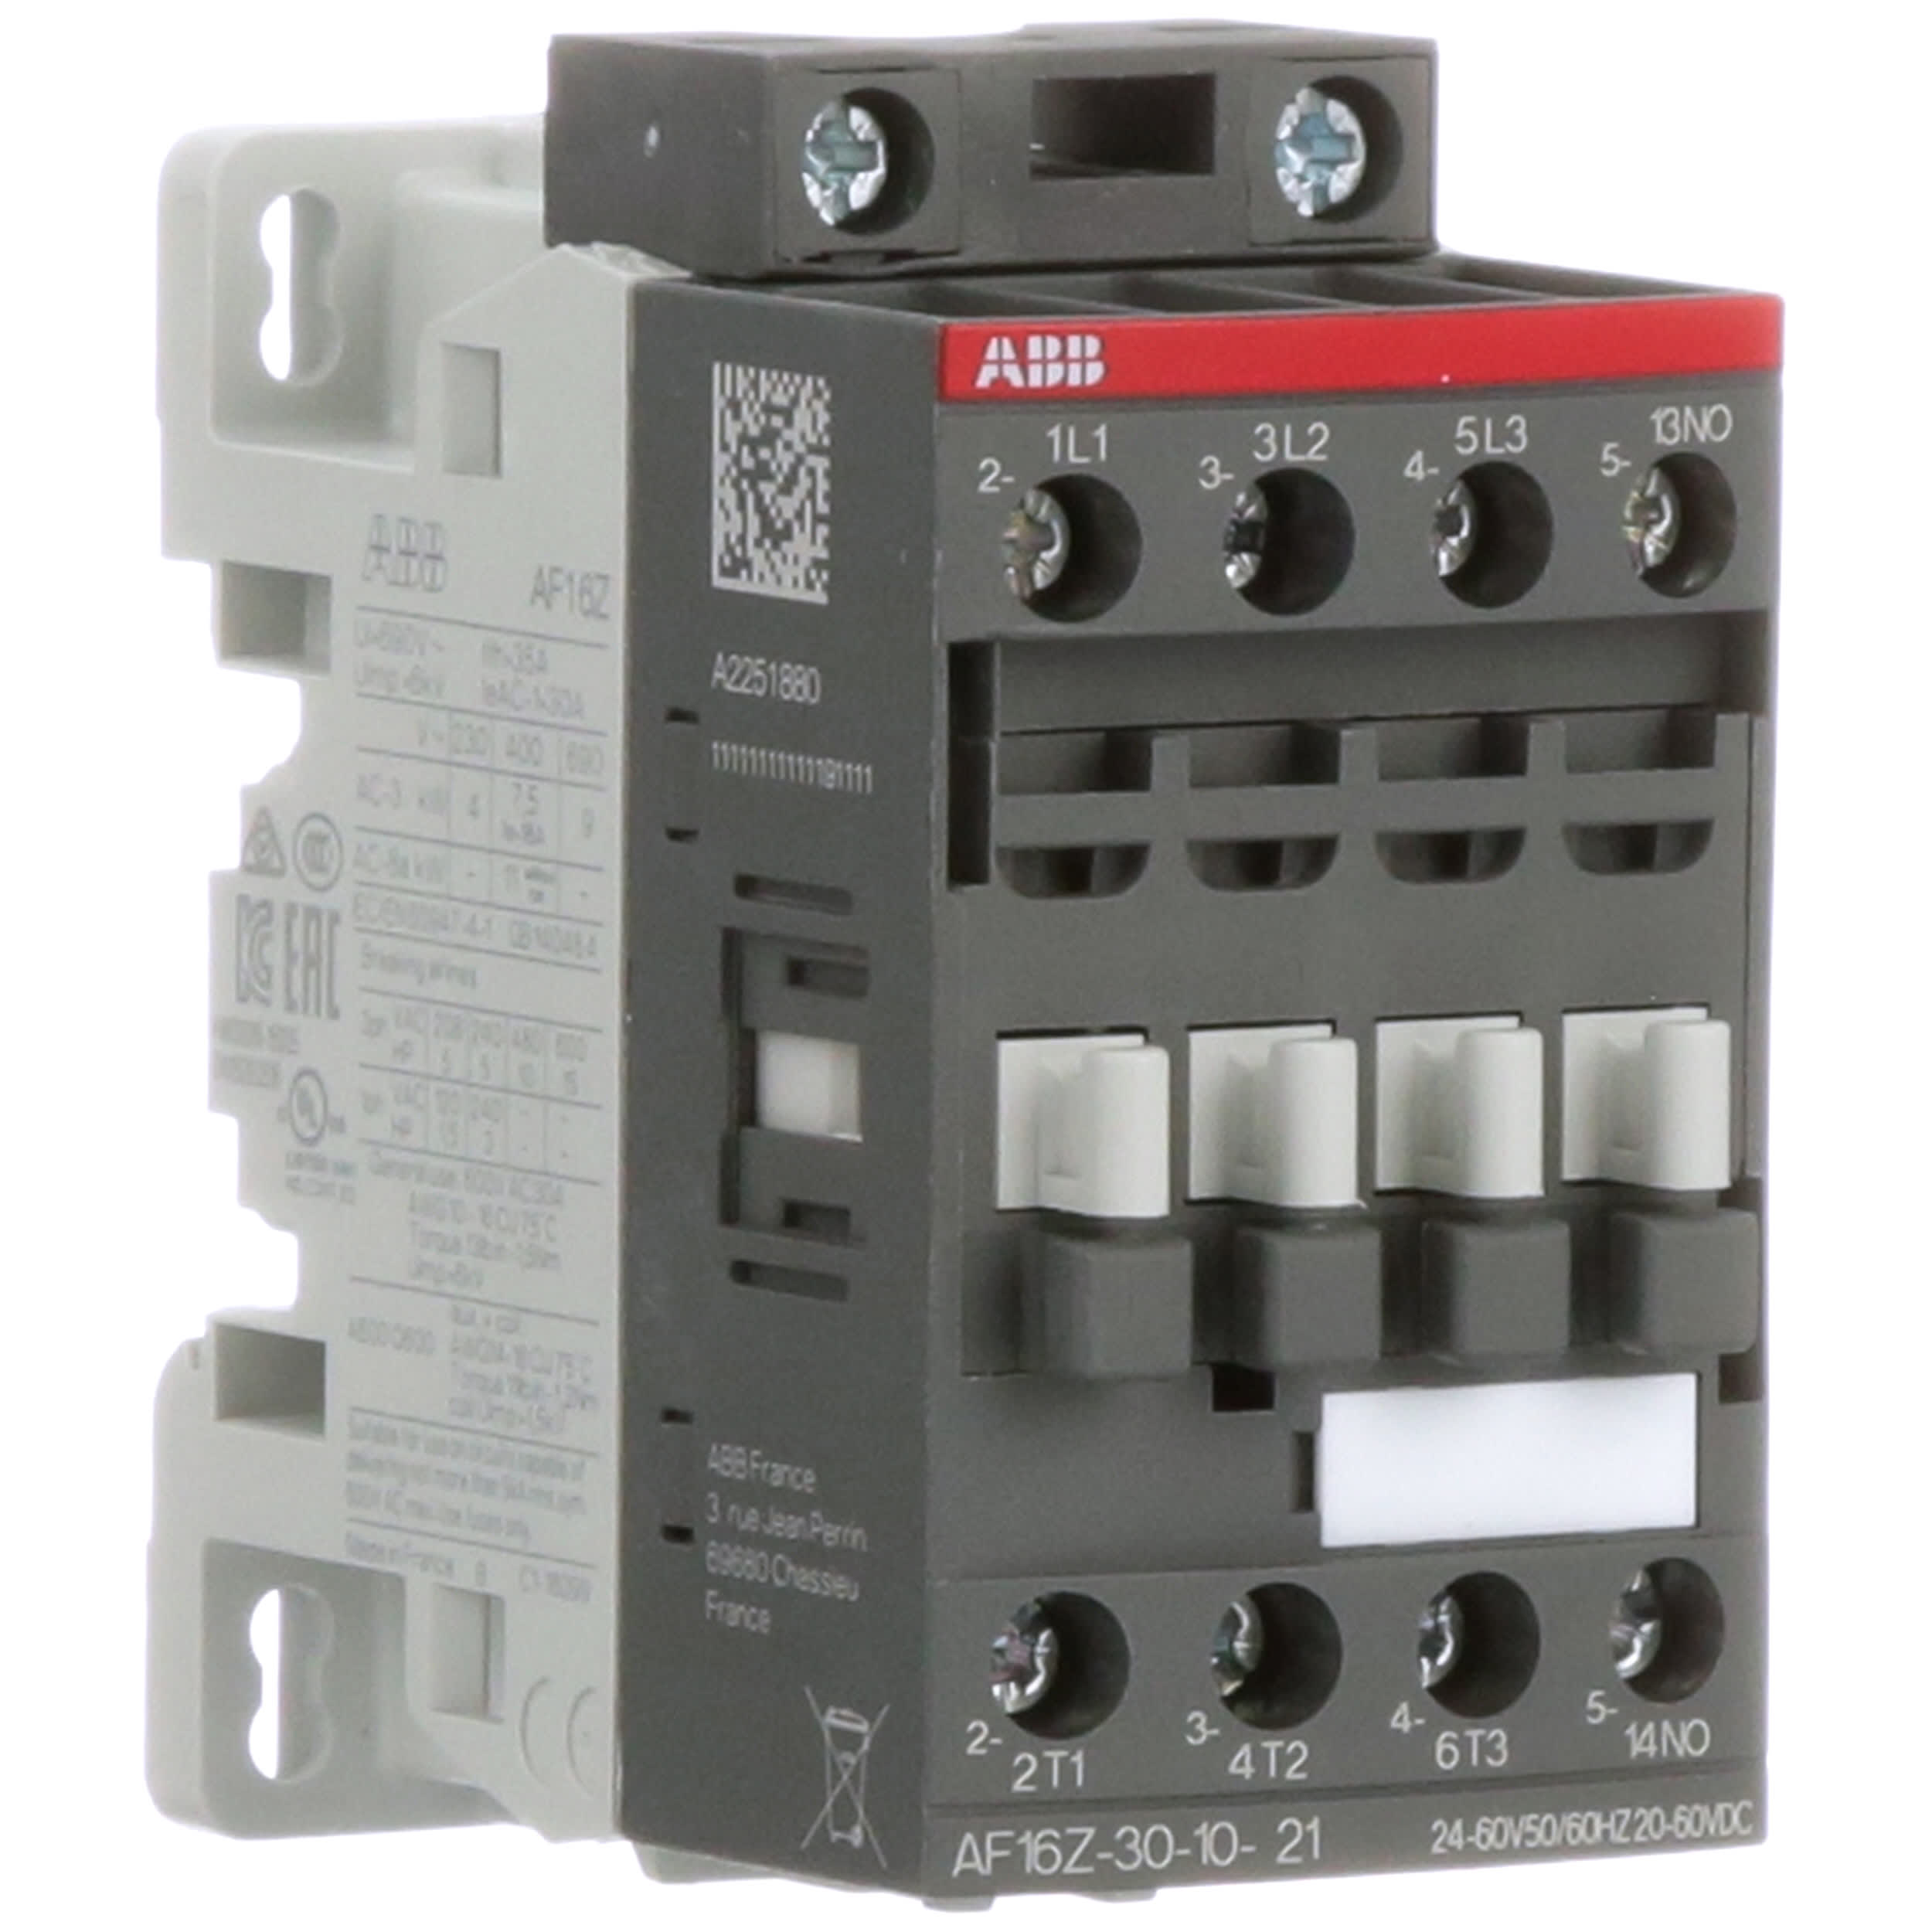 Details about   ABB TBC16-30-10-55 CONTACTOR NEW IN BOX * 